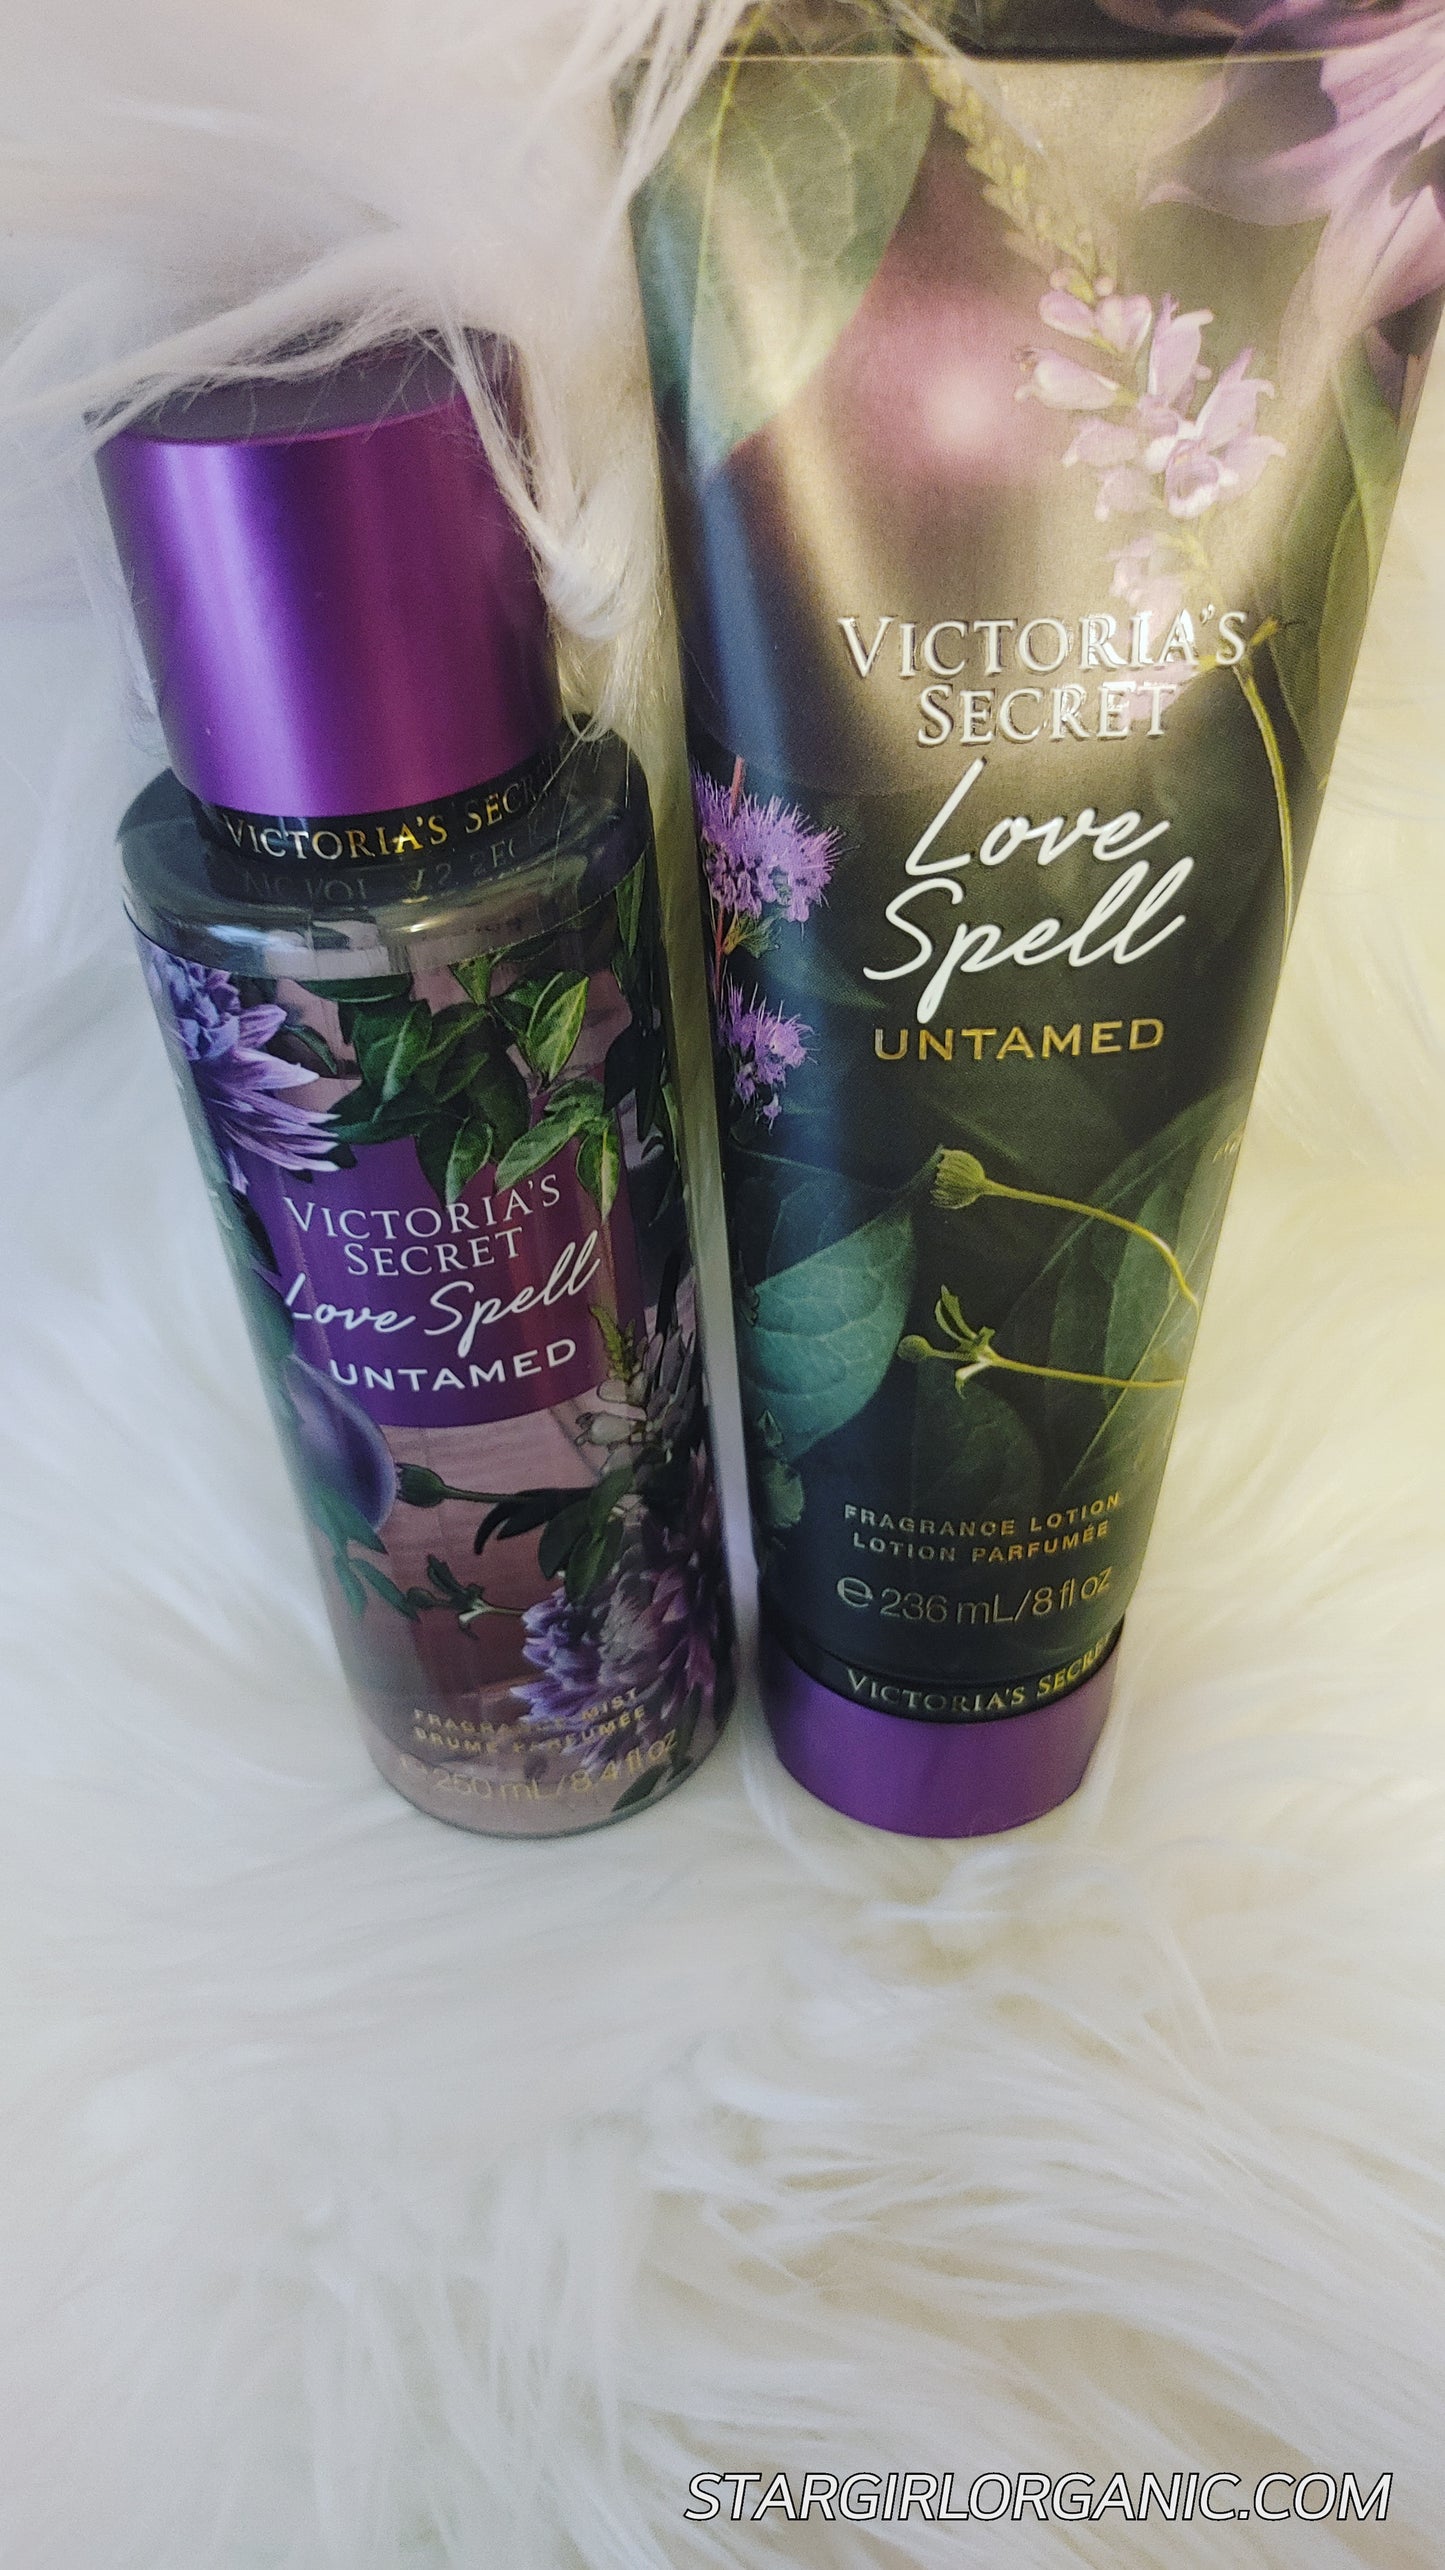 Victoria's Secret 2PC Love Spell Untamed Limited Addition Sets